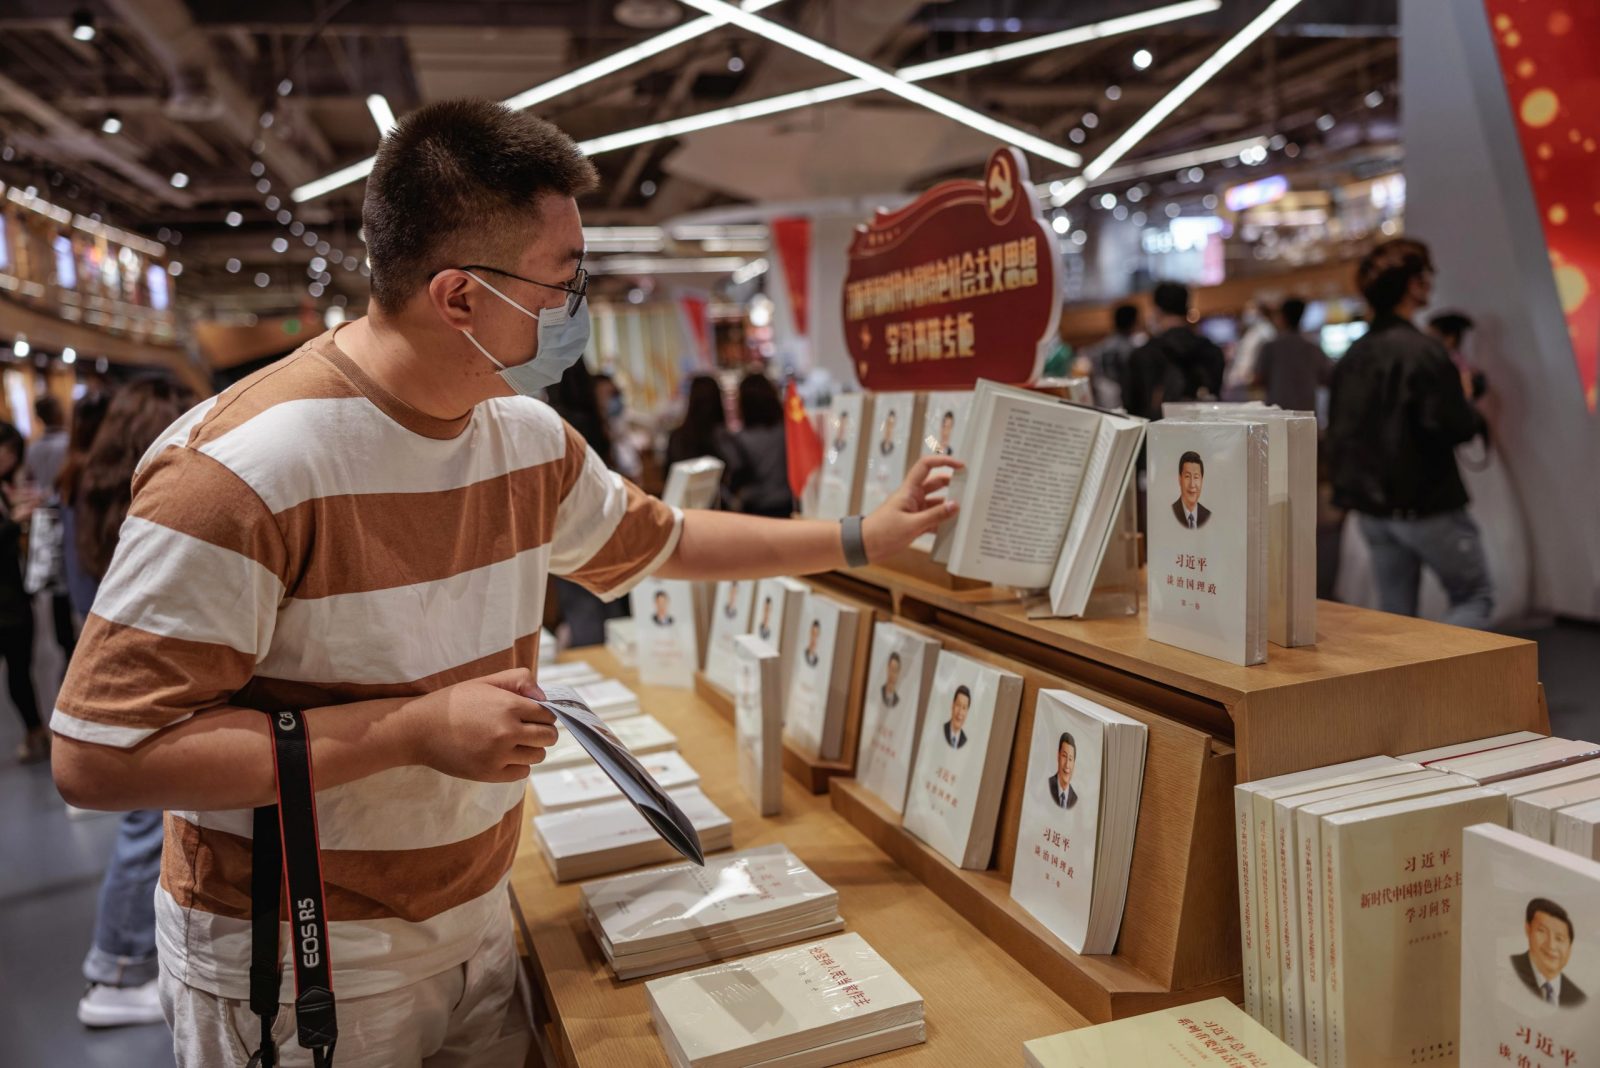 epa10195080 A man looks at the book of Xi Jinping, President of the People's Republic of China, in a Xinnongli Yan Plus Bookstore in Yancheng, Jiangsu province, China, 20 September 2022. Xi Jinping, the President of China and general secretary of the Chinese Communist Party (CCP), is expected to be granted a third five-year term in the upcoming Communist Party congress on 16 October 2022.  EPA/ALEX PLAVEVSKI